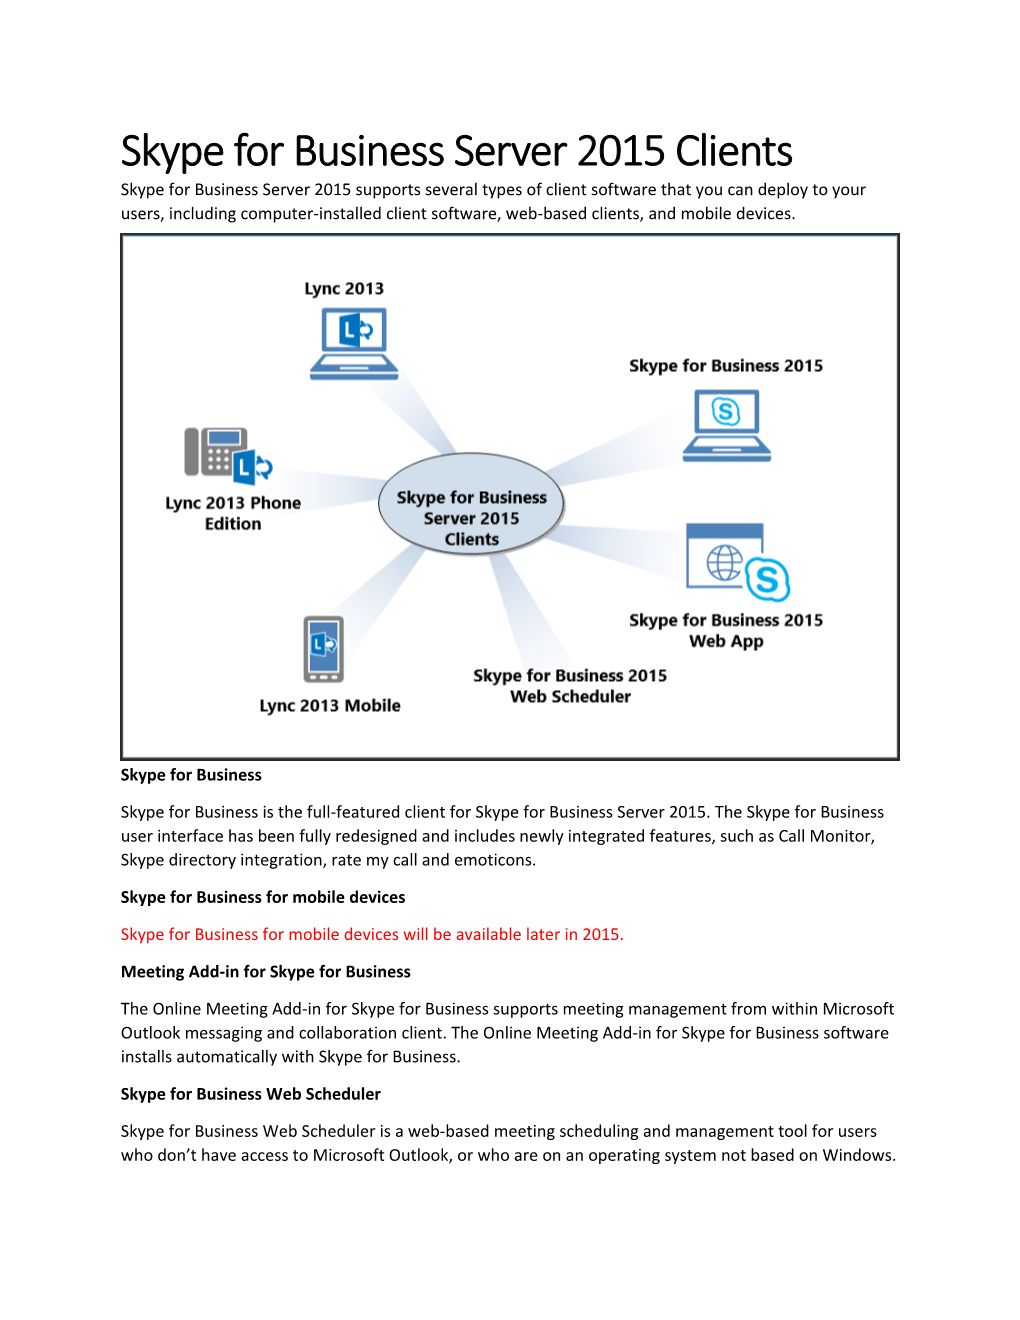 Skype for Business Server 2015 Clients